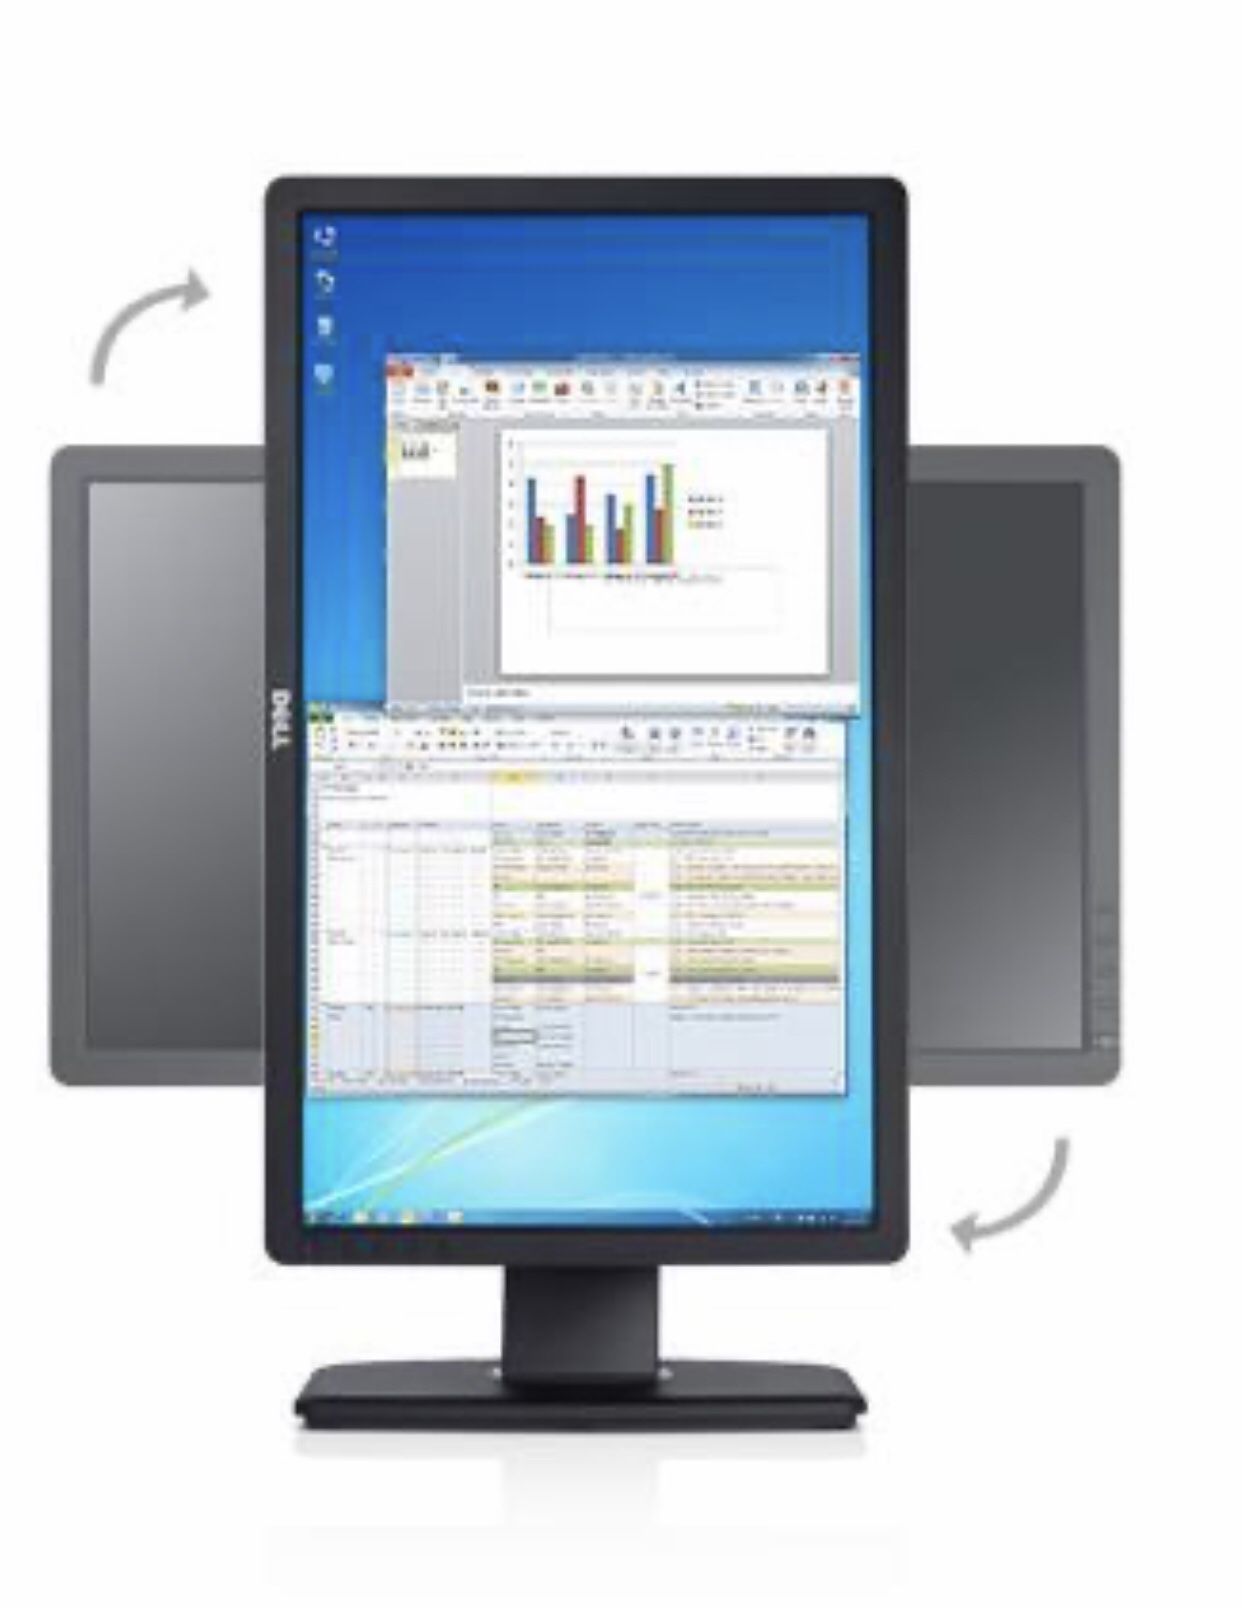 Dell P2212HB 1920 x 1080 Resolution 22" Widescreen LCD Flat Panel Computer Monitor Display